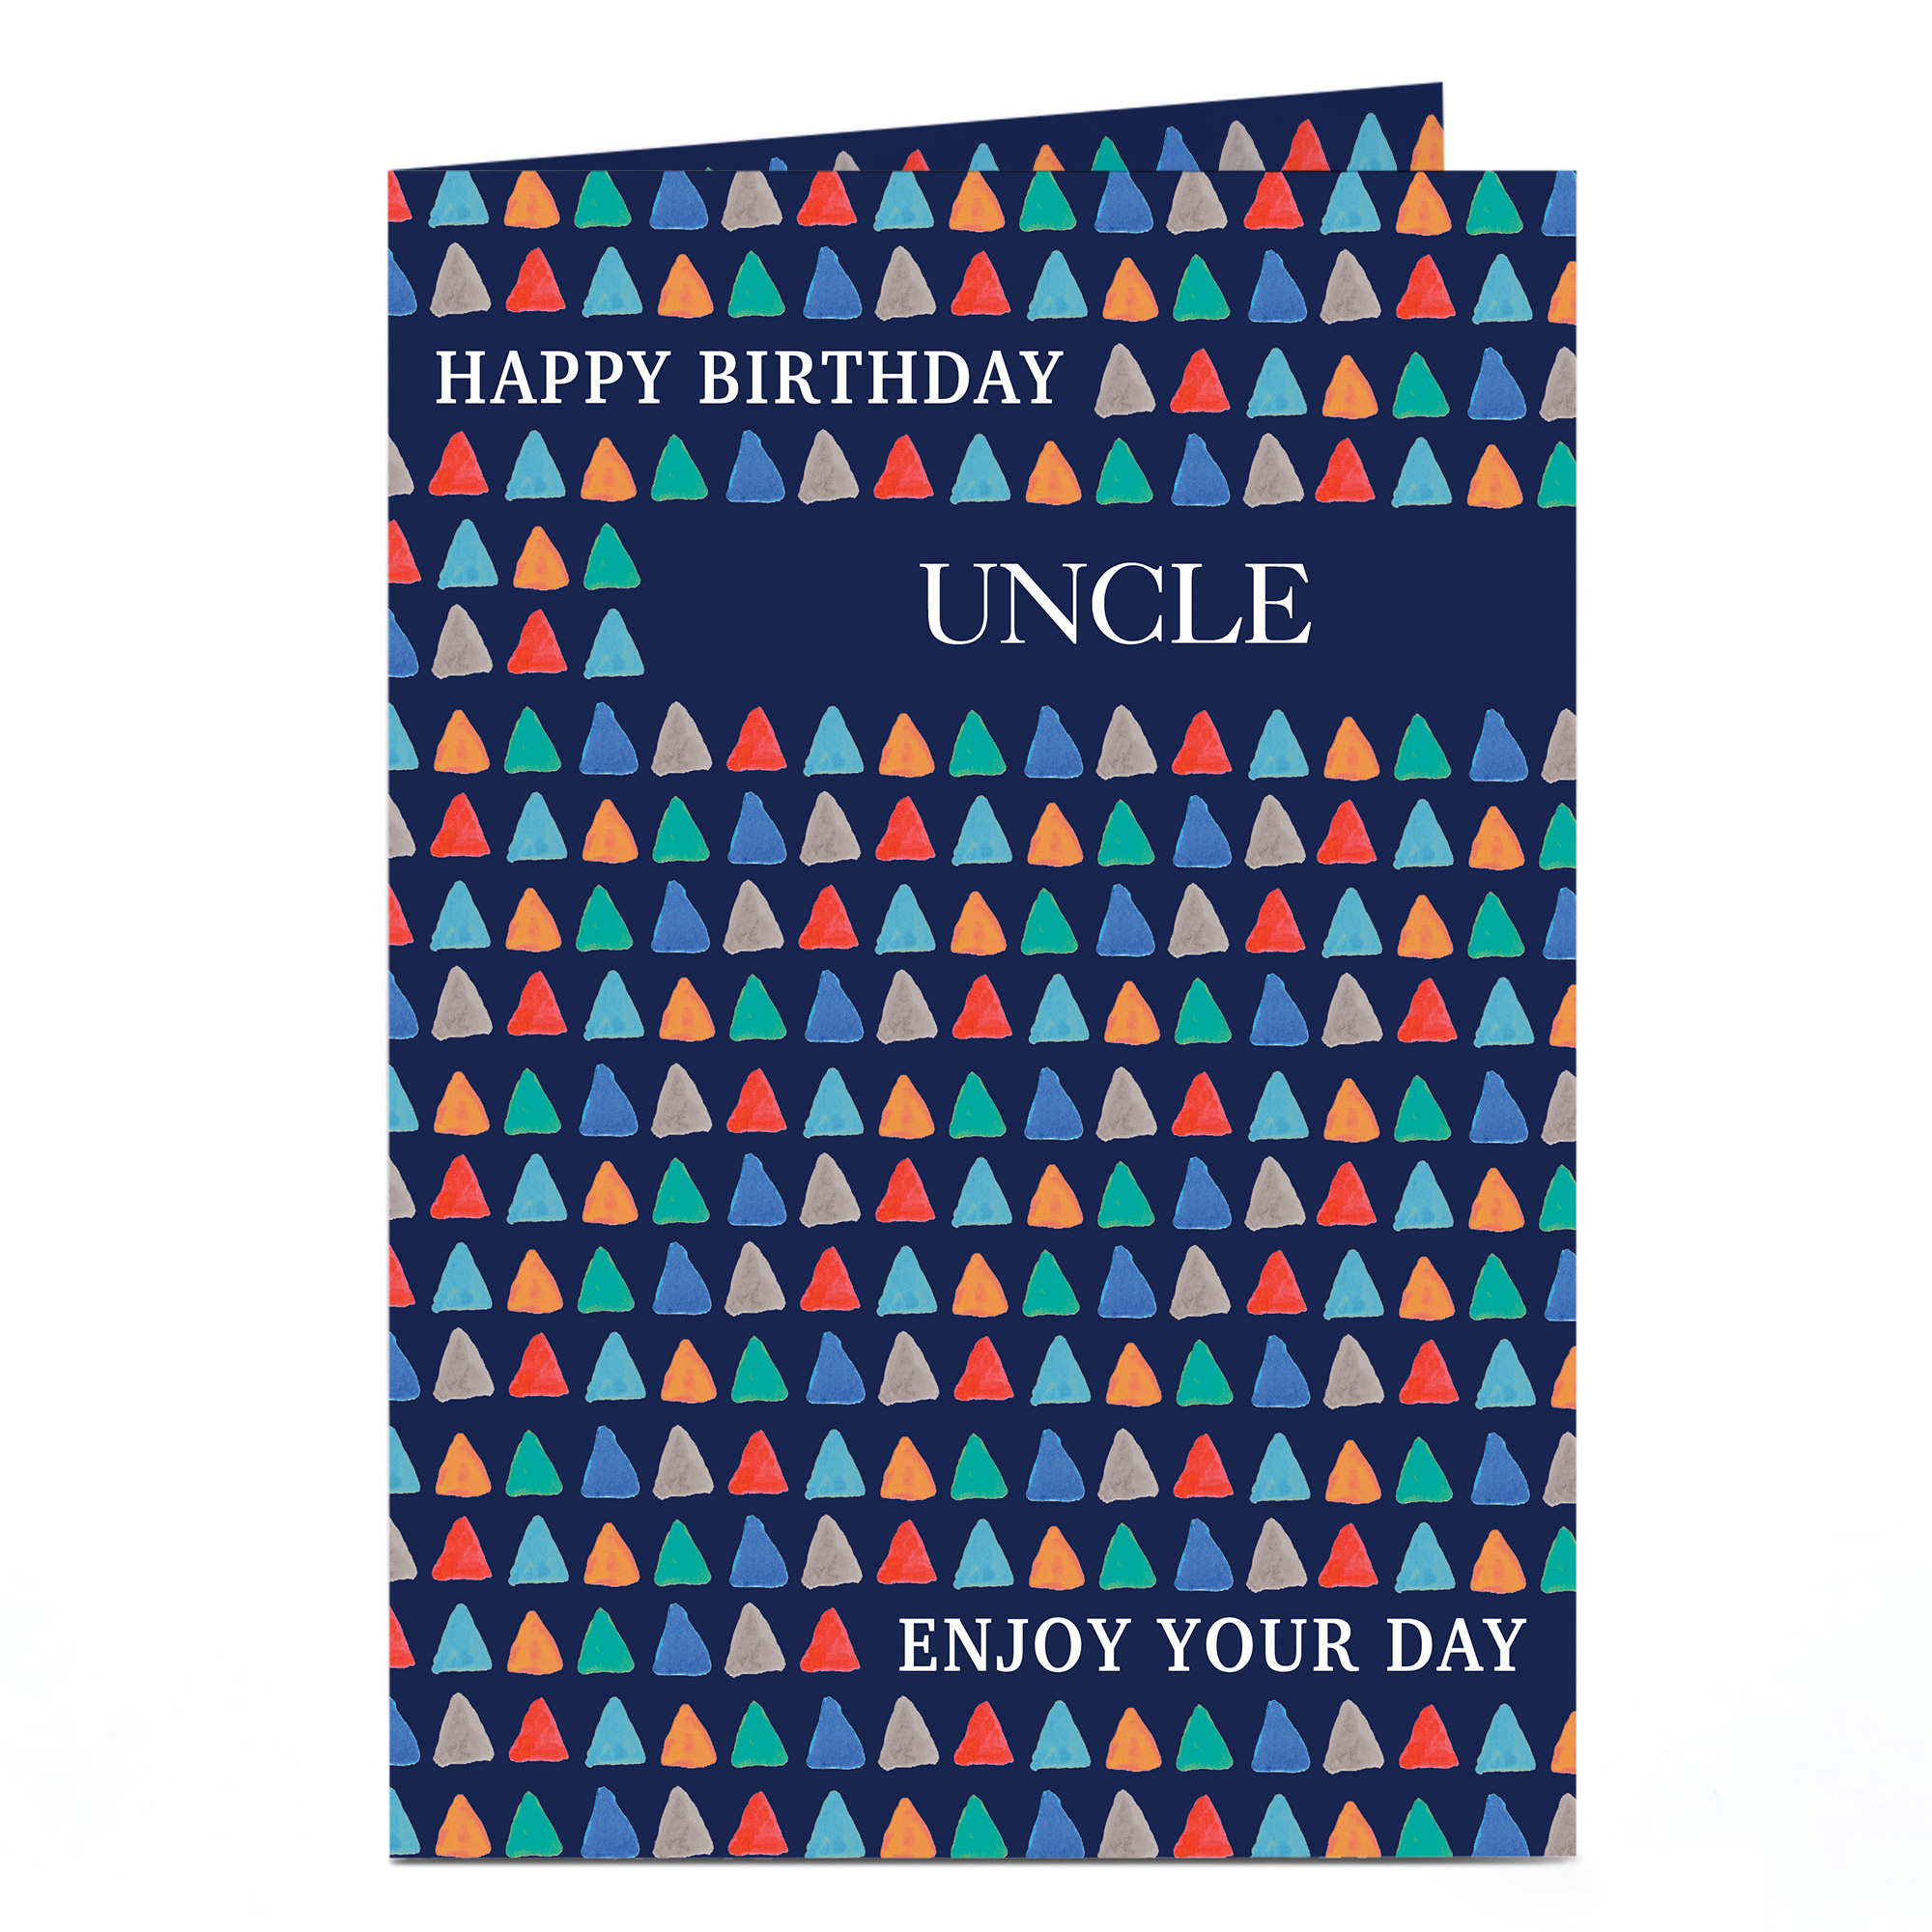 Personalised Birthday Card - Triangular Pattern, Uncle